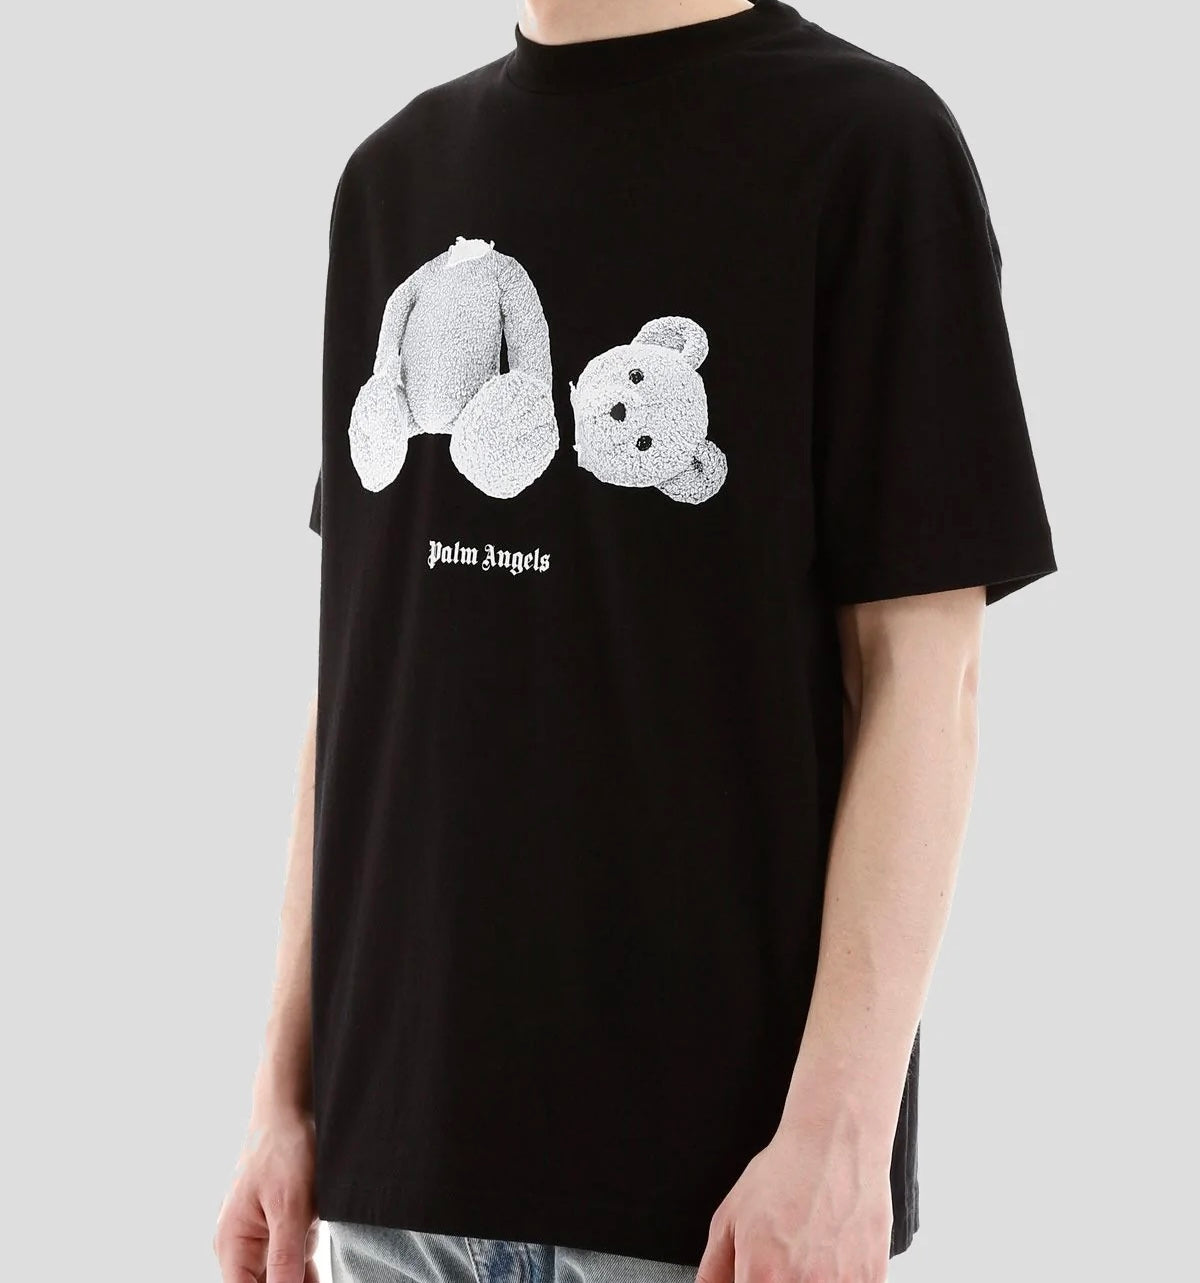 PALM ANGELS T-SHIRT BEAR BLACK AND WHITE – MILANO OUTLET MODA